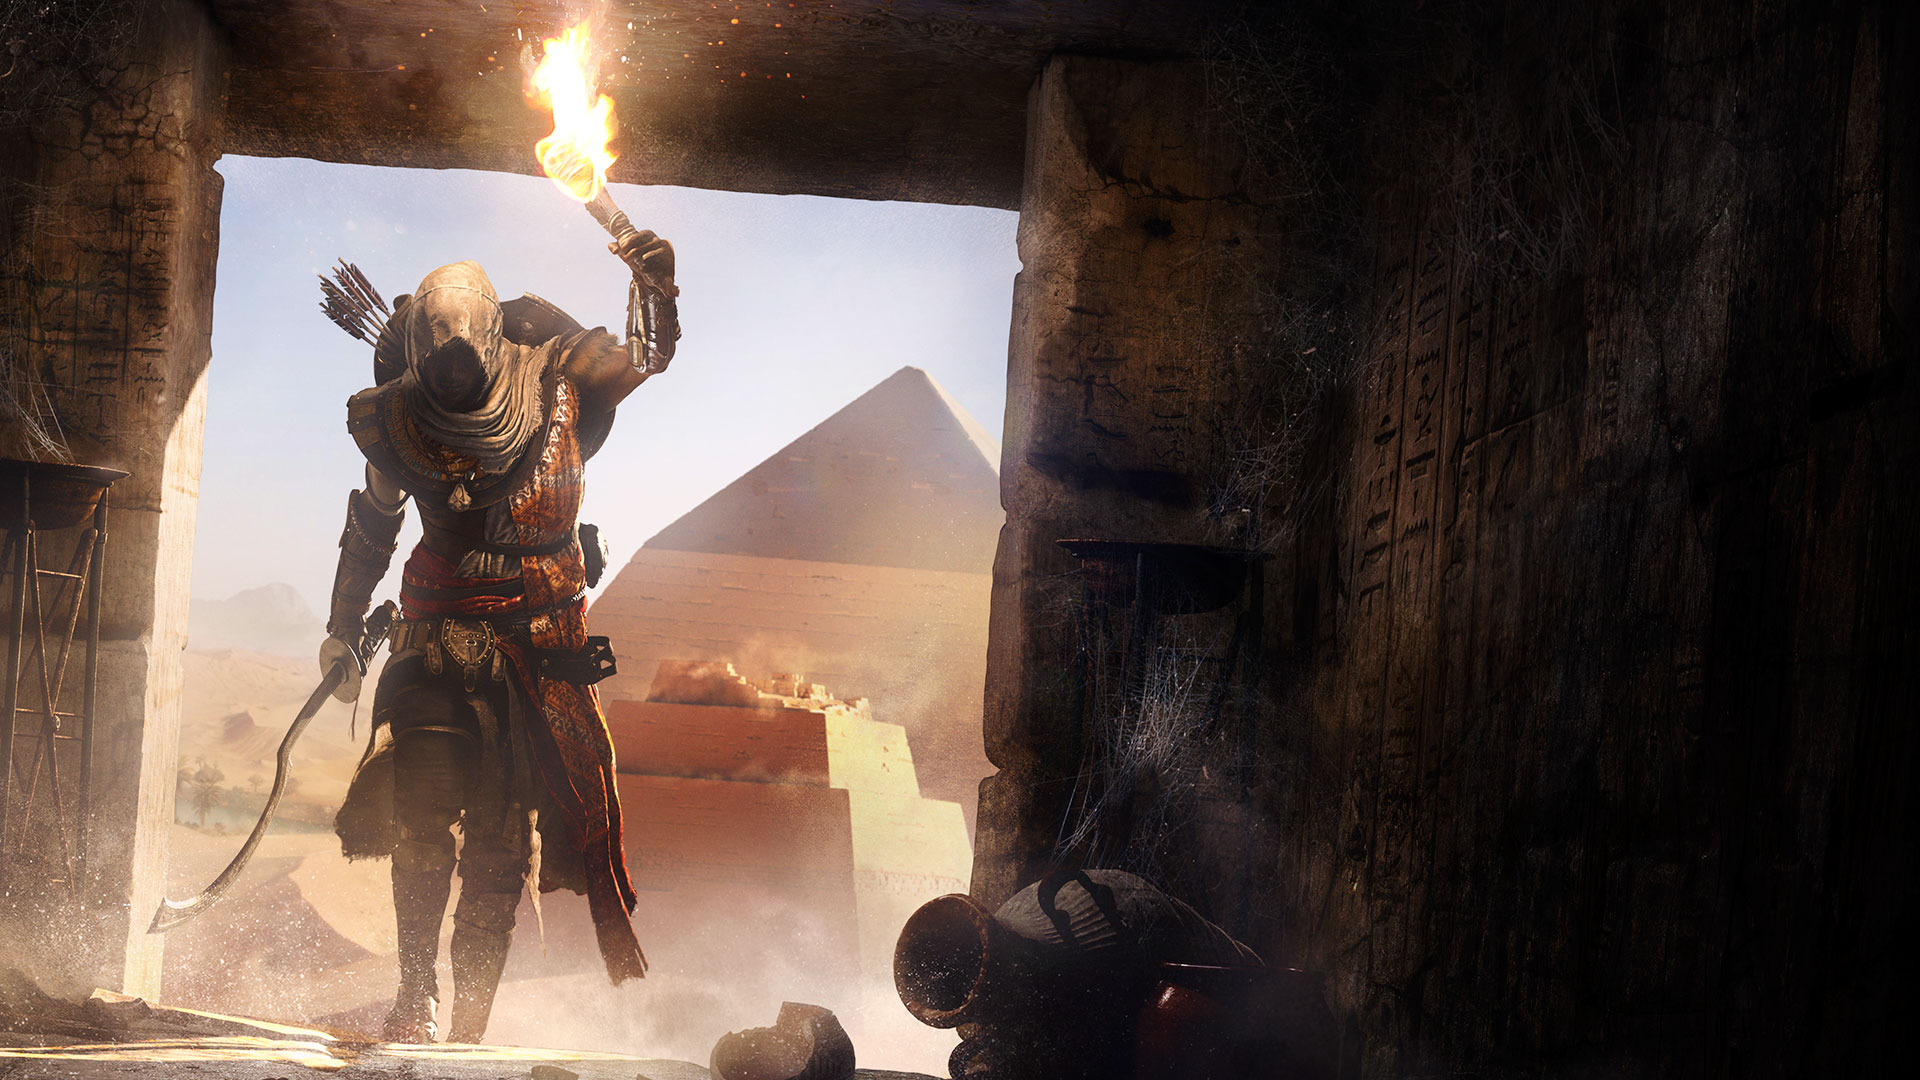 Fake positive reviews for Assassin's Creed Origins pour into Metacritic